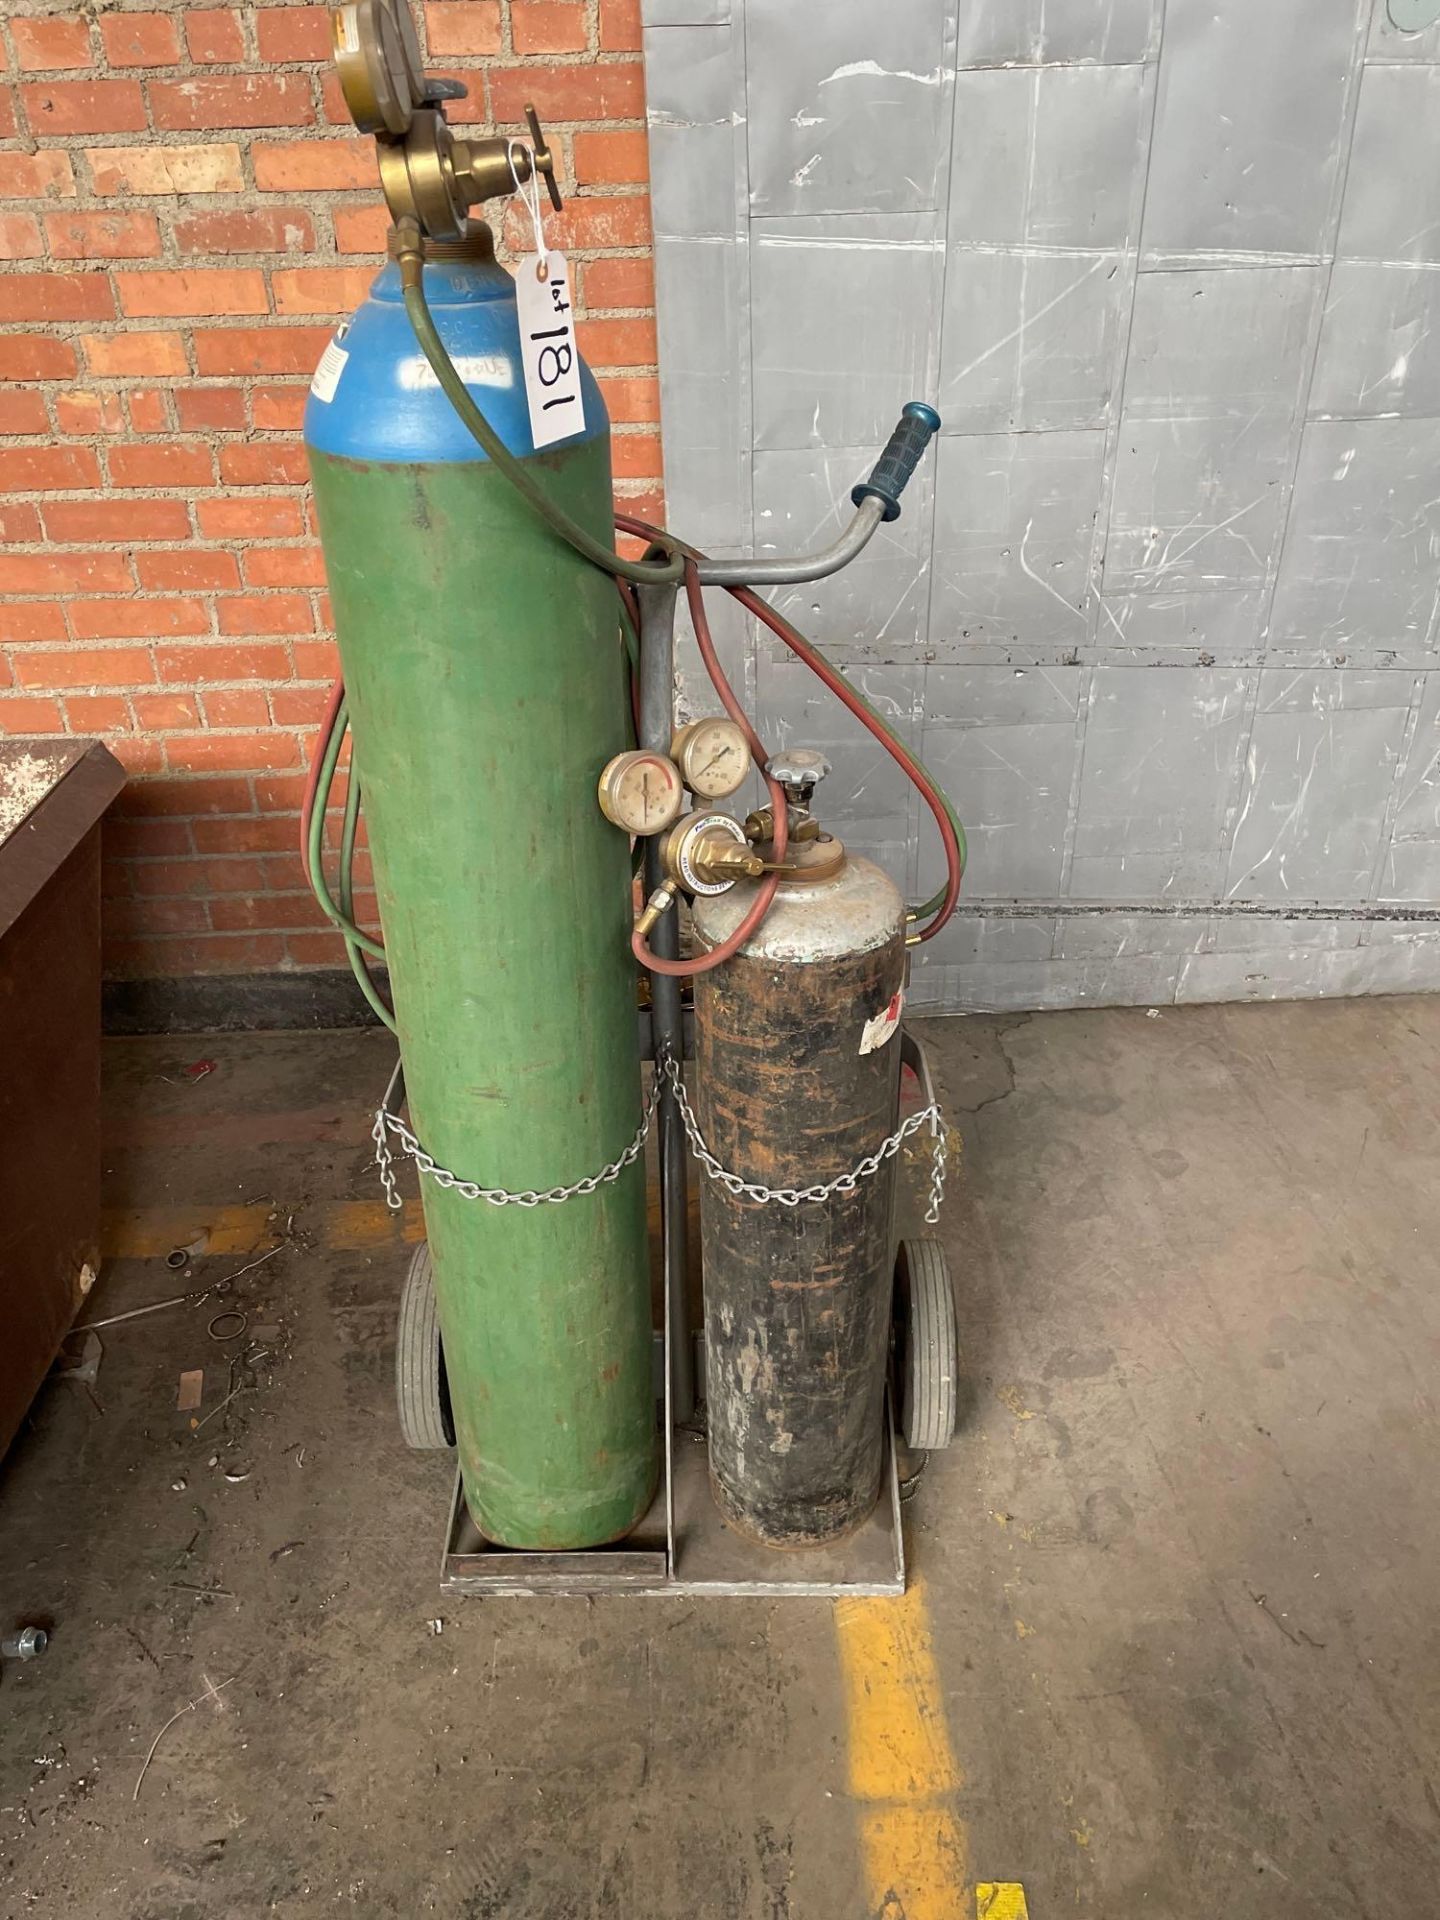 Acetylene Tanks and cart